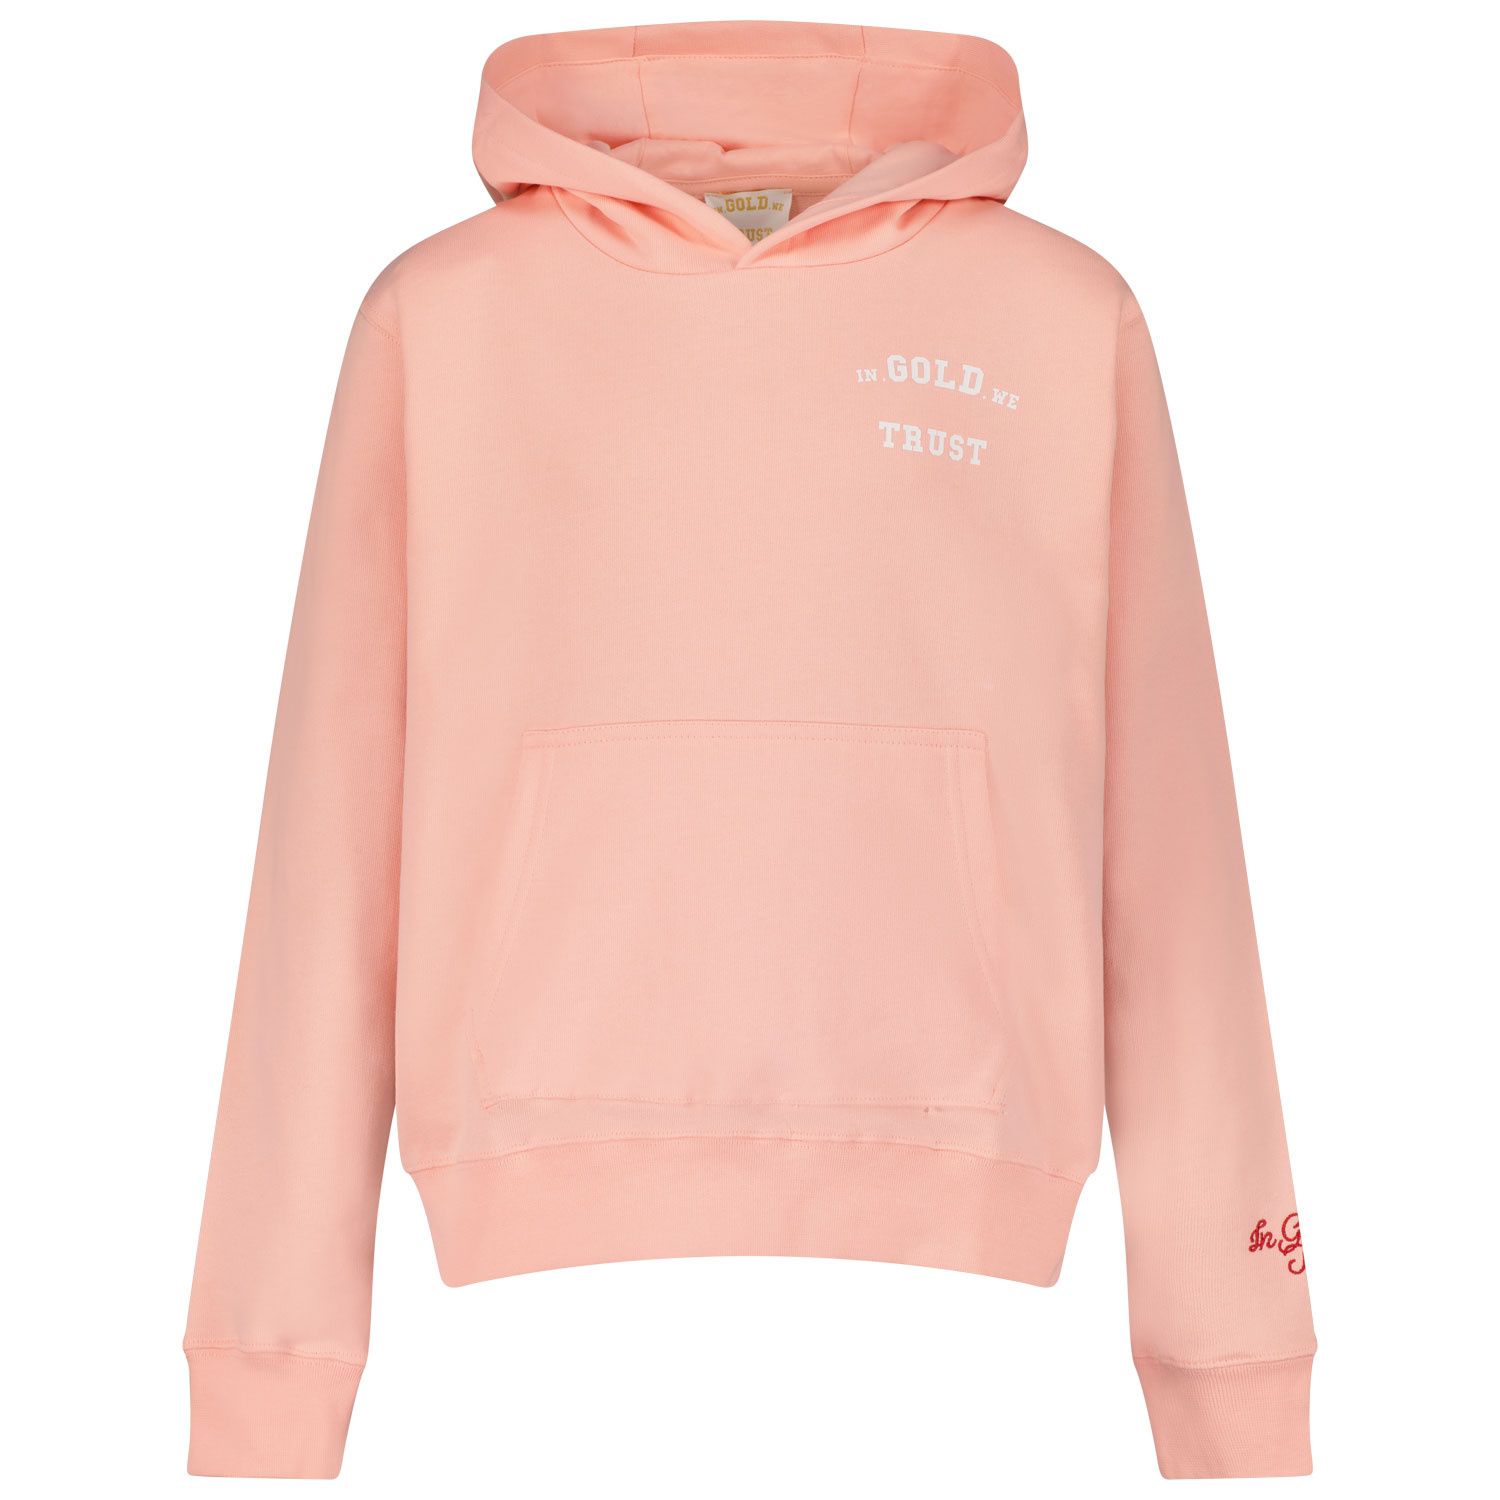 Picture of in Gold We Trust The Notorious kids sweater peach